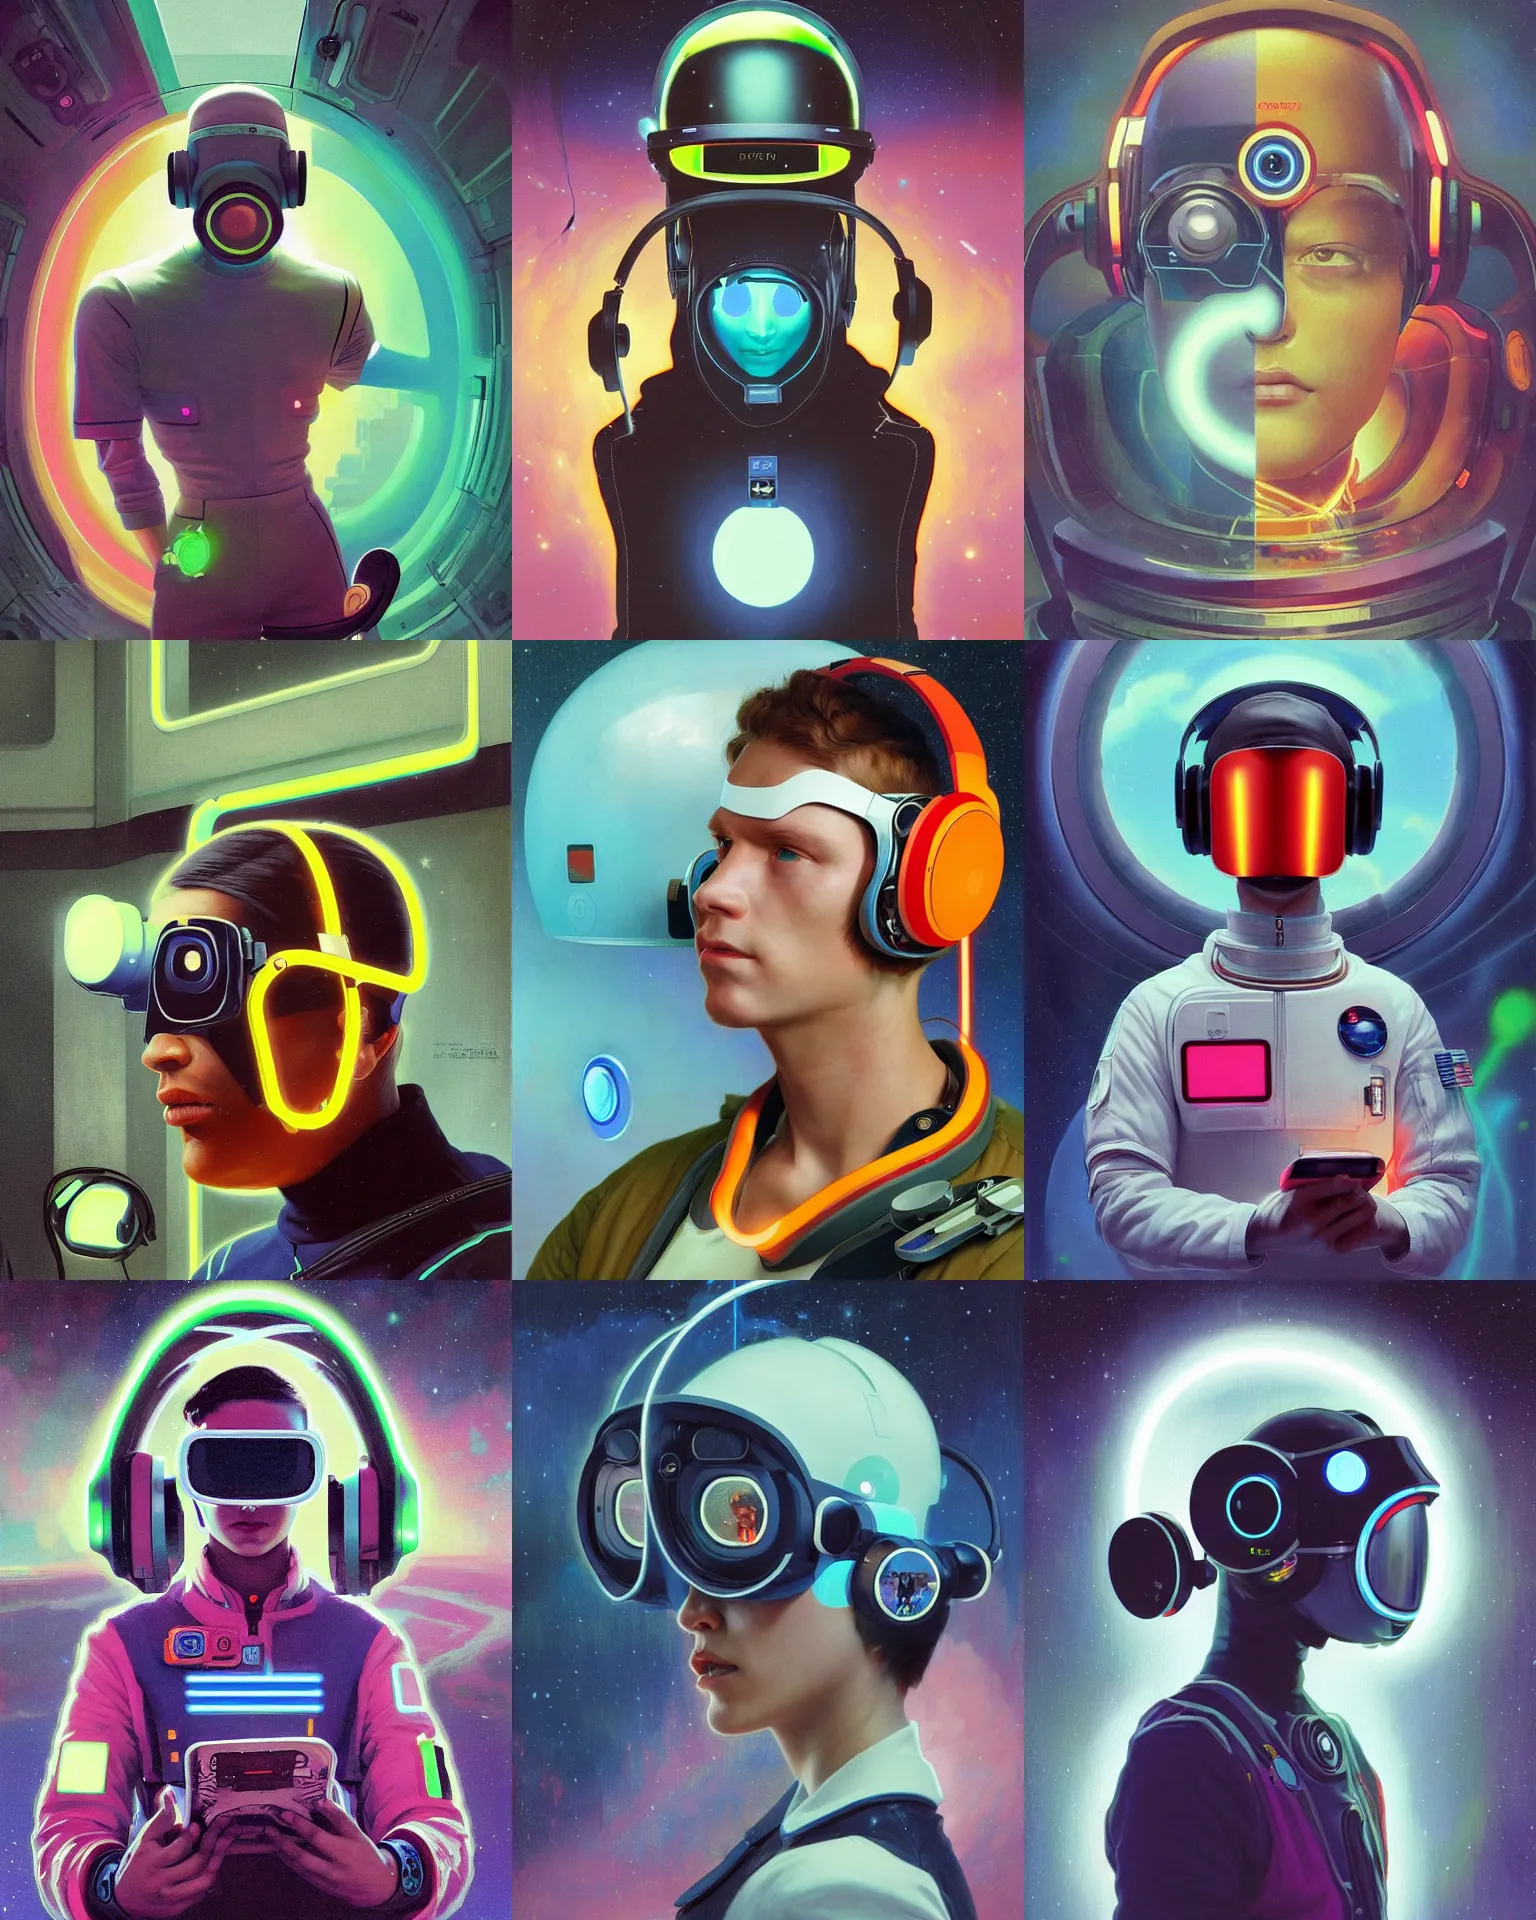 Prompt: future coder looking on, cyclops visor over eyes and sleek electric headphones, space station uniform neon accents, desaturated headshot portrait painting by dean cornwall, ilya repin, rhads, tom whalen, alex grey, alphonse mucha, donoto giancola, astronaut cyberpunk electric fashion photography